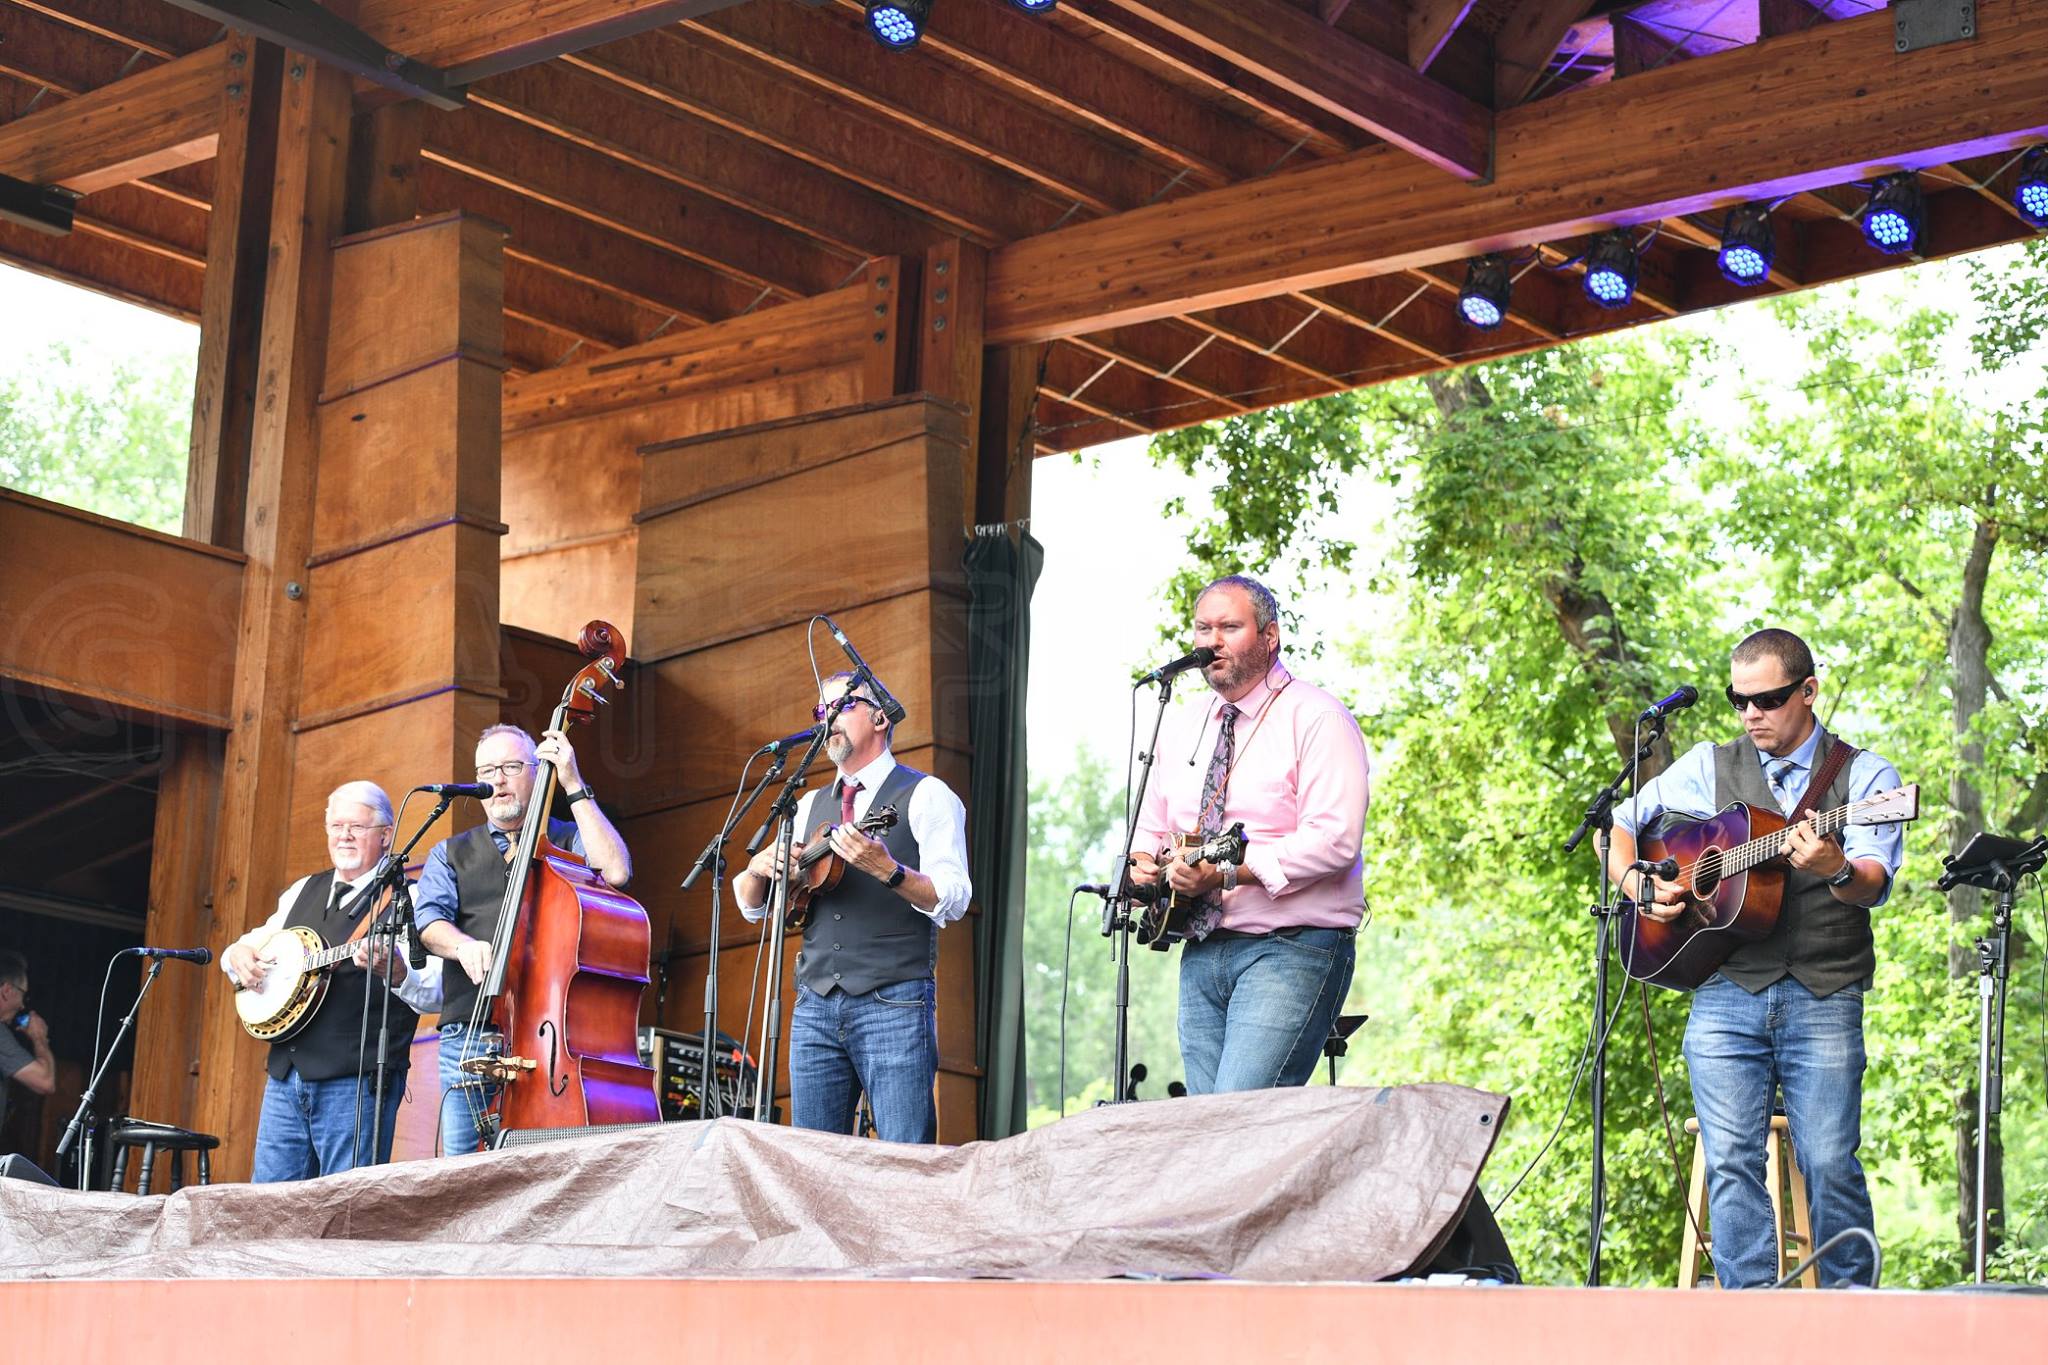 Balsam Range Wins IBMA Entertainer of the Year Award